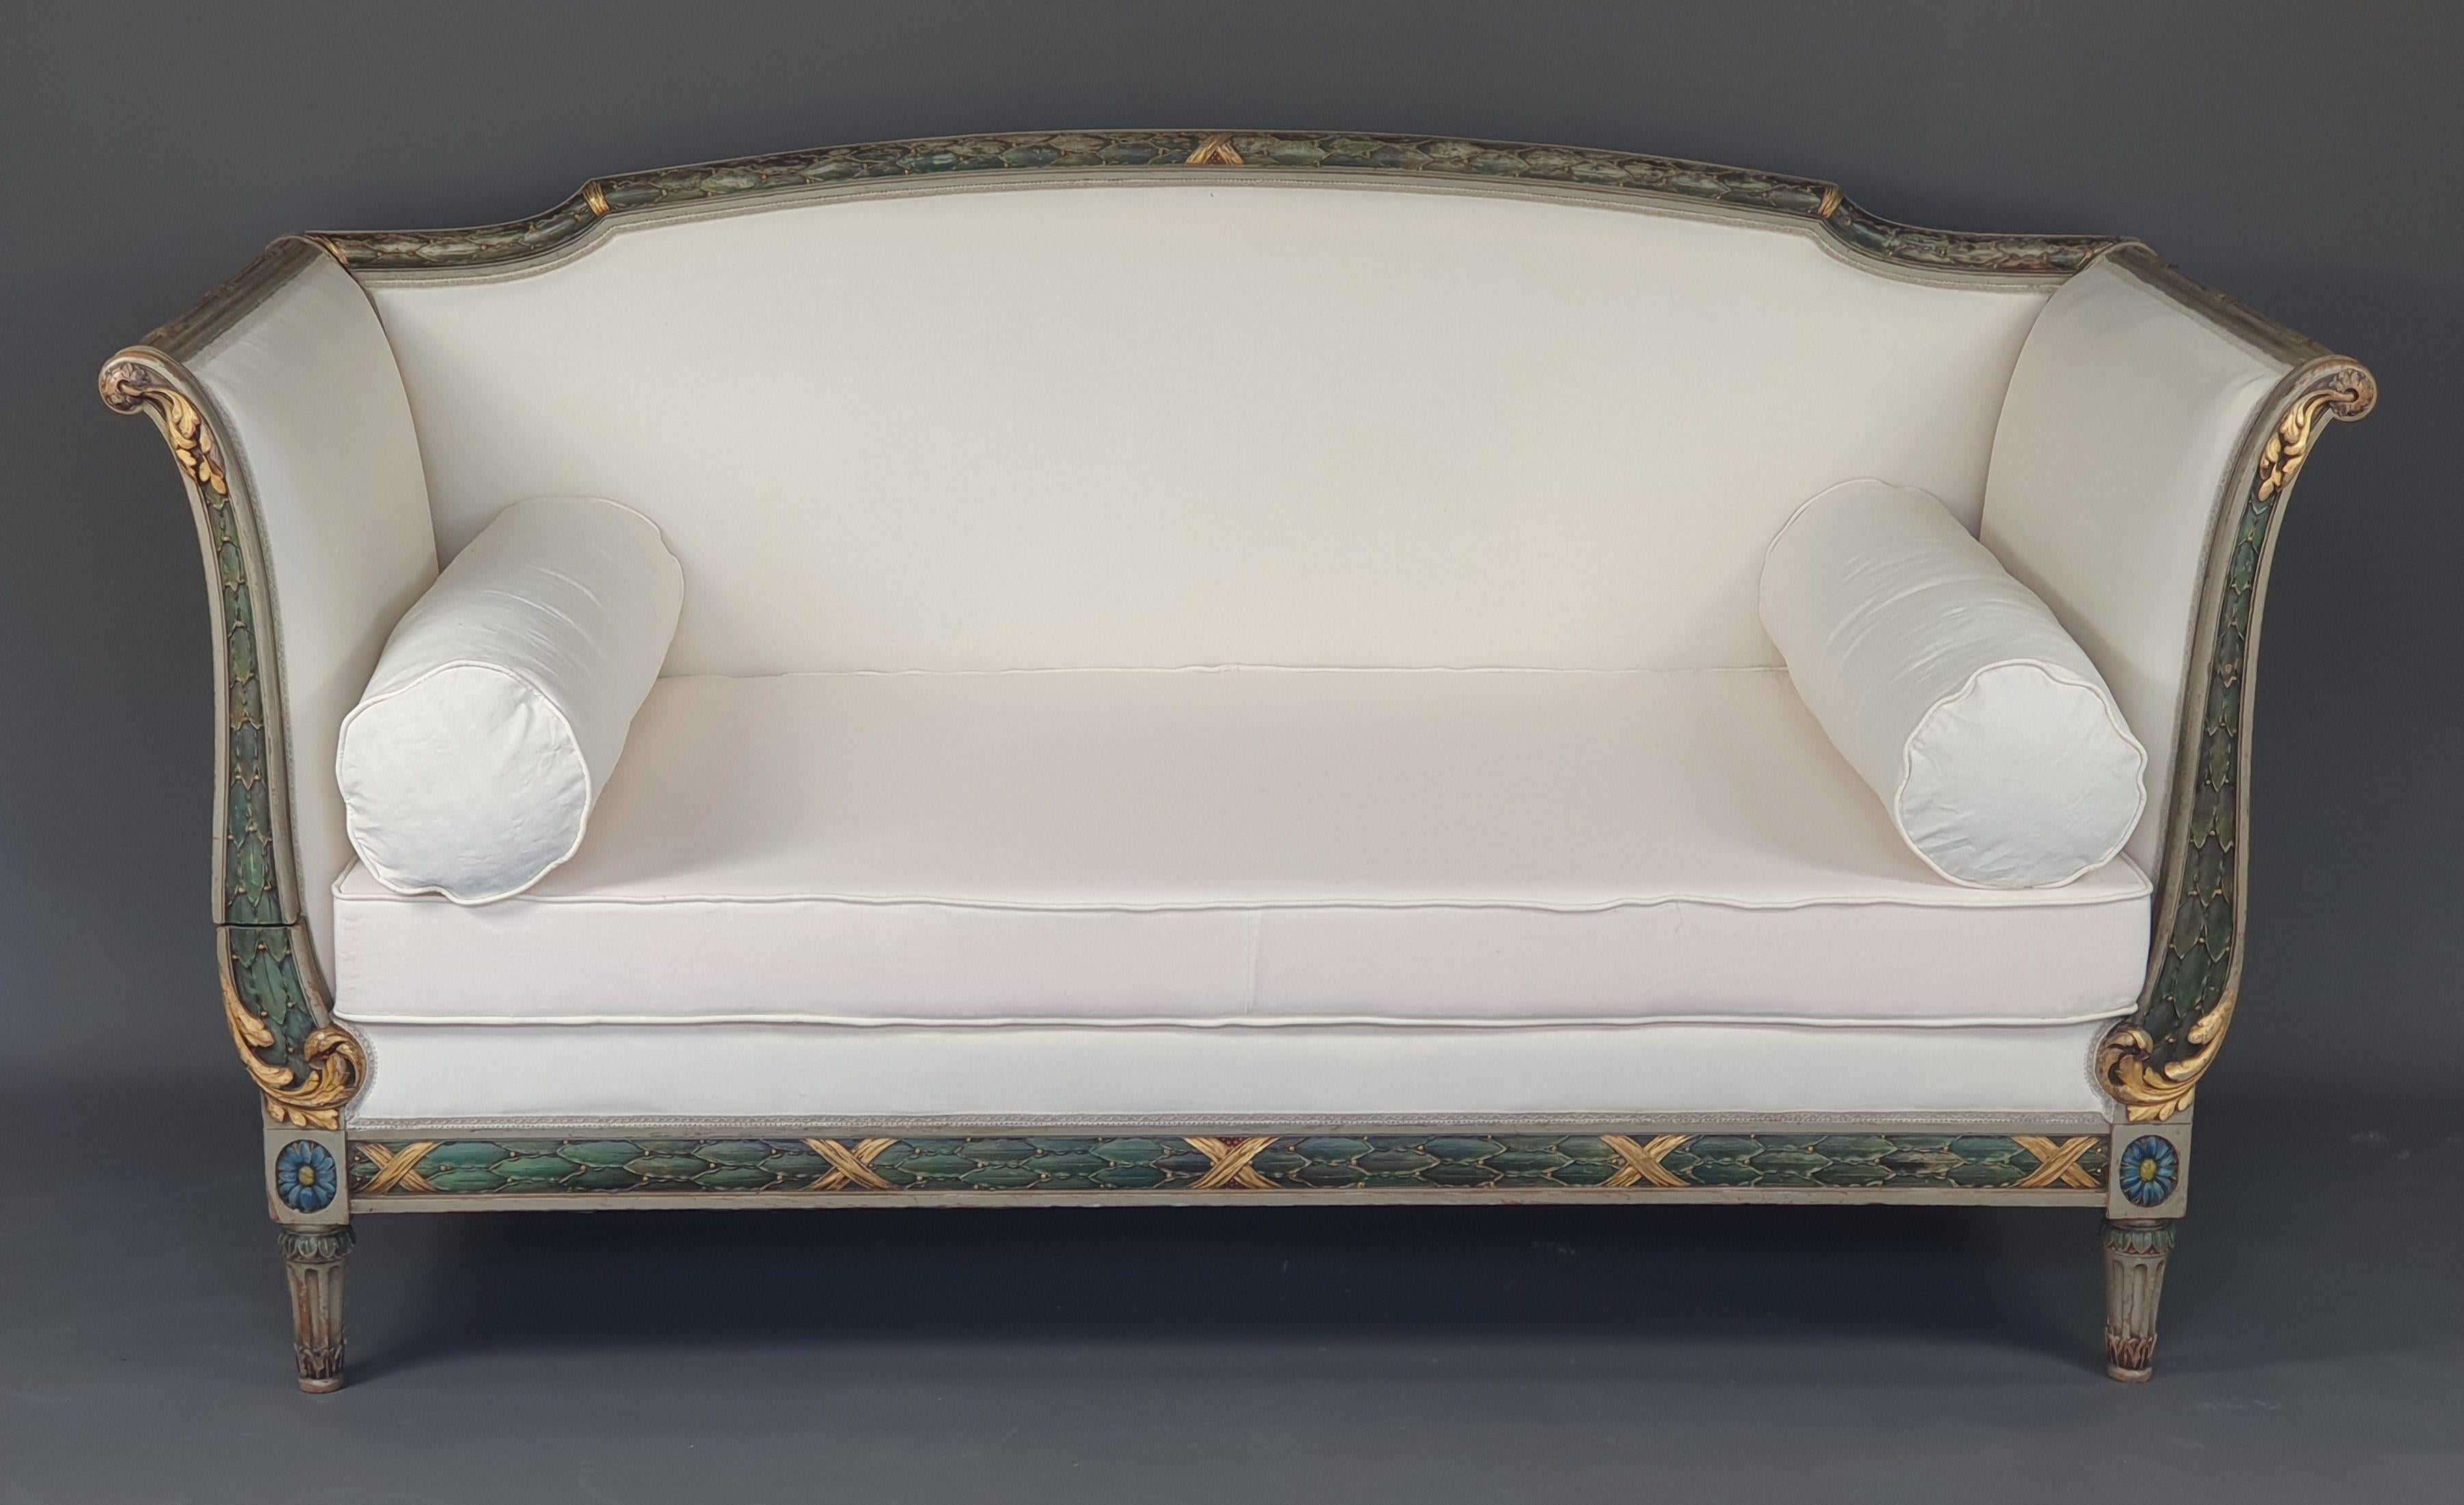 Magnificent Louis XVI sofa in the style of the ottomans in gray lacquered wood and green, blue and gold rechampi with rich carved decoration of scrolls, wrapped foliage, resting on four fluted legs, the connecting dice in the shape of